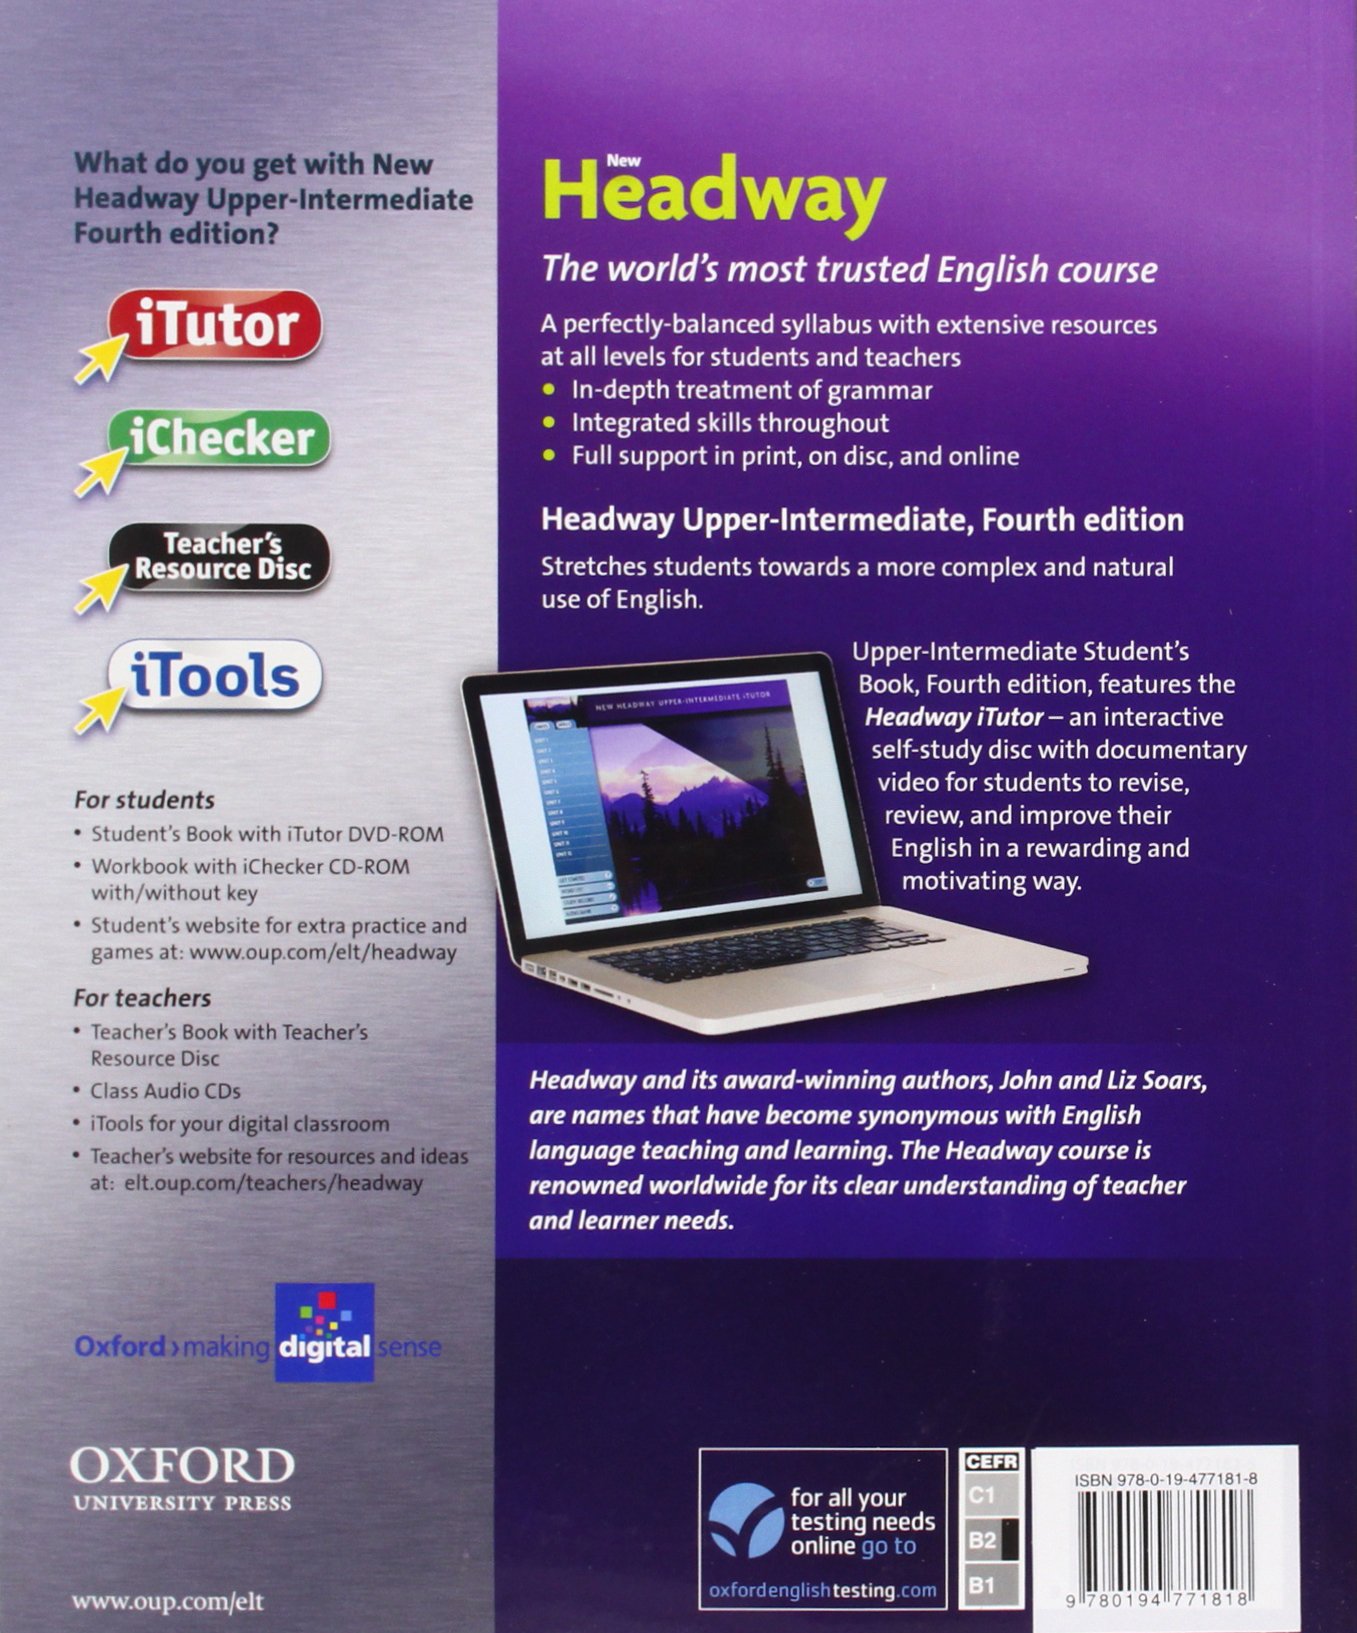 New headway upper. Headway 4 Edition Upper-Intermediate. New Headway 4 Edition Upper Intermediate teacher book —. Headway Upper Intermediate 4th Edition. New Headway Upper Intermediate 4th Edition teacher's book.